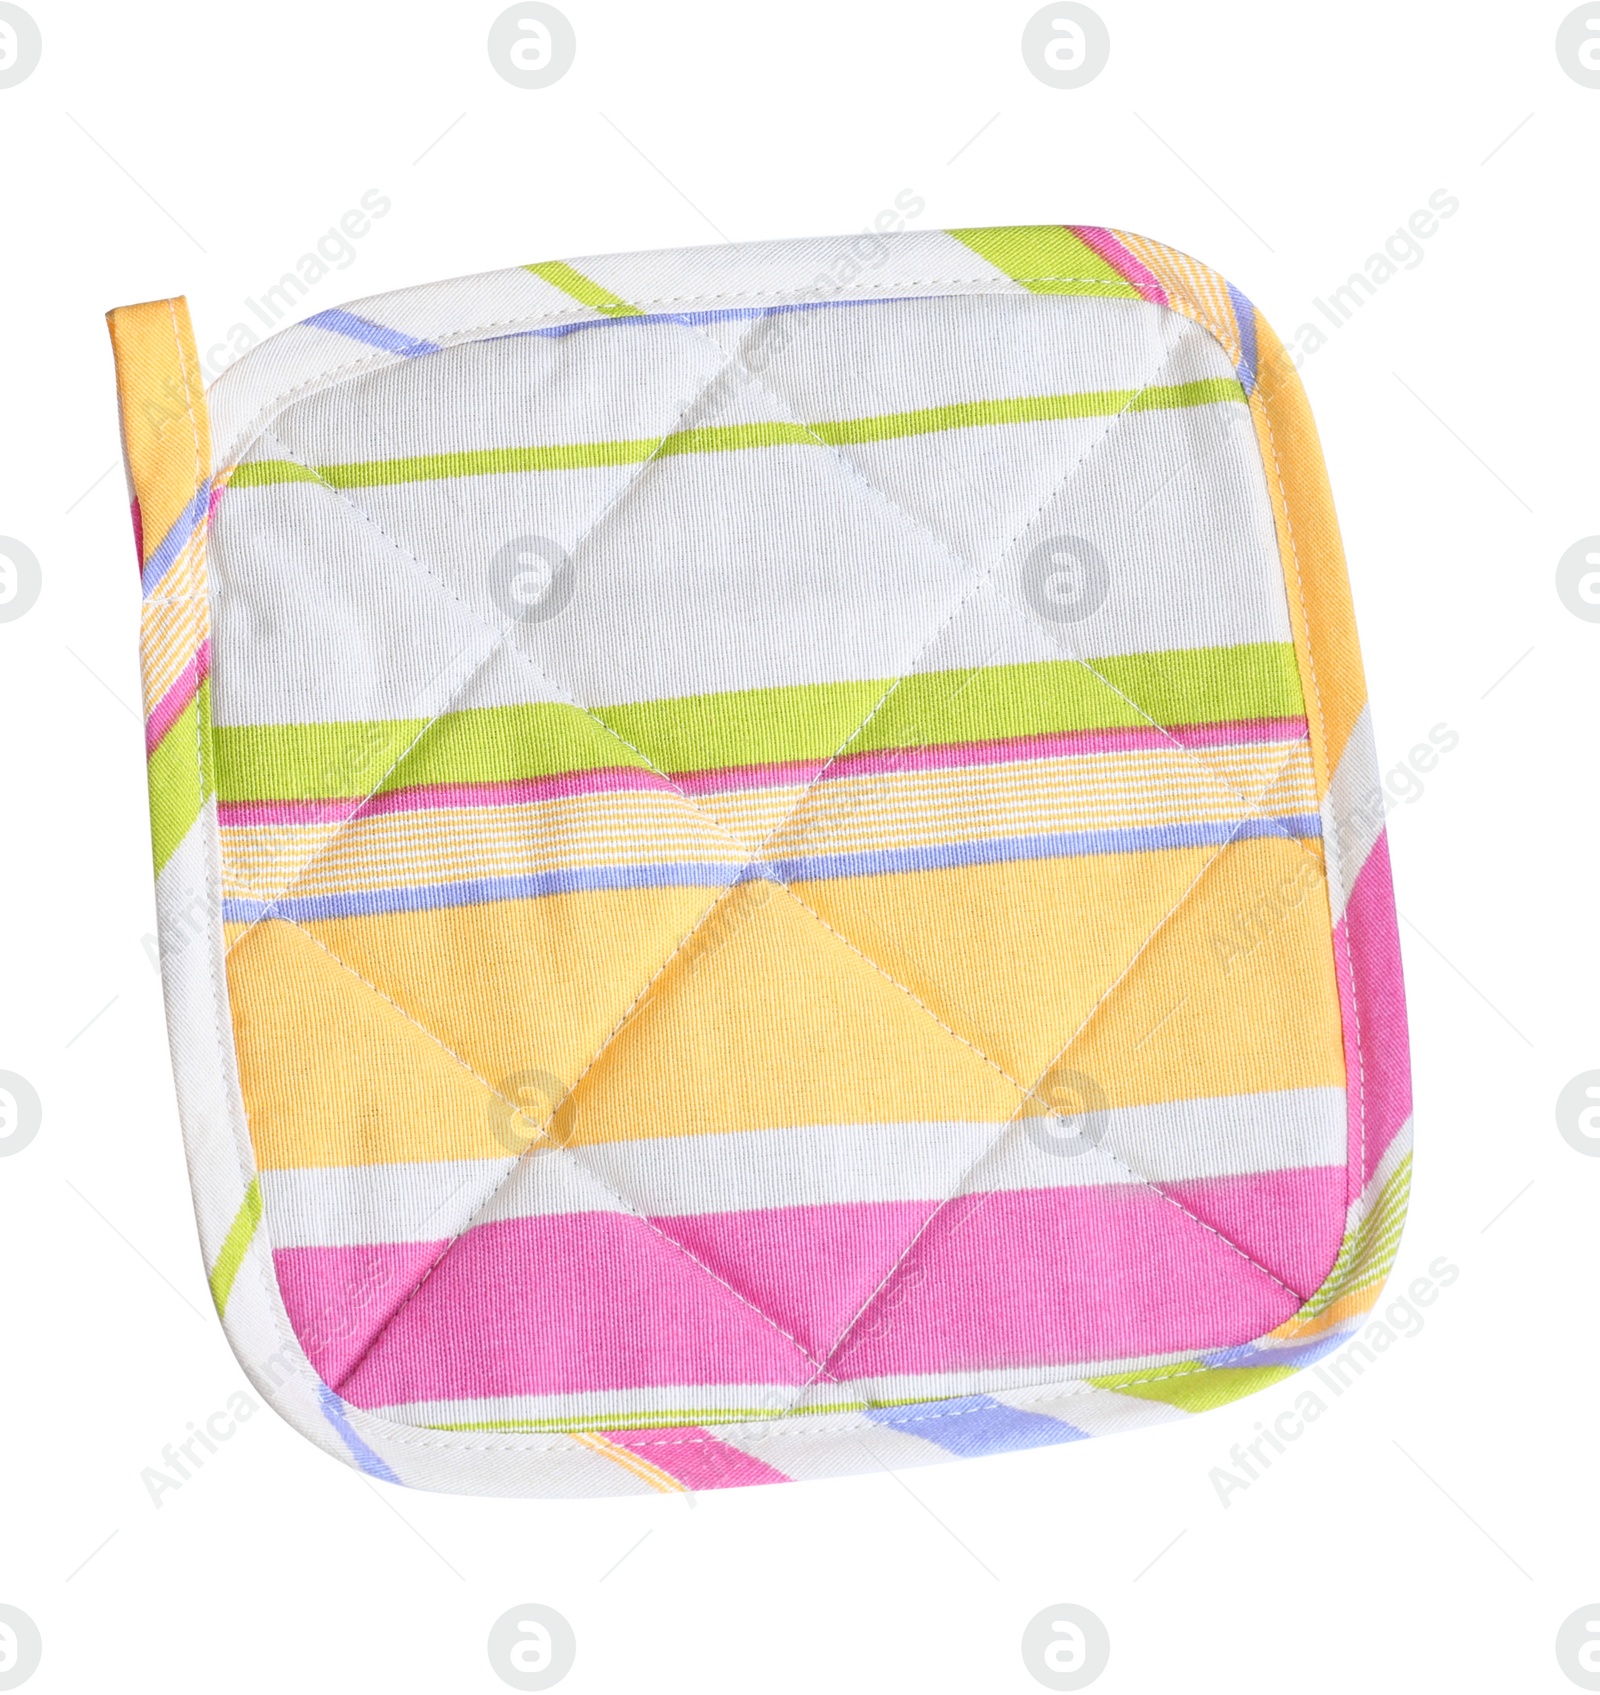 Photo of Oven potholder for hot dishes on white background, top view